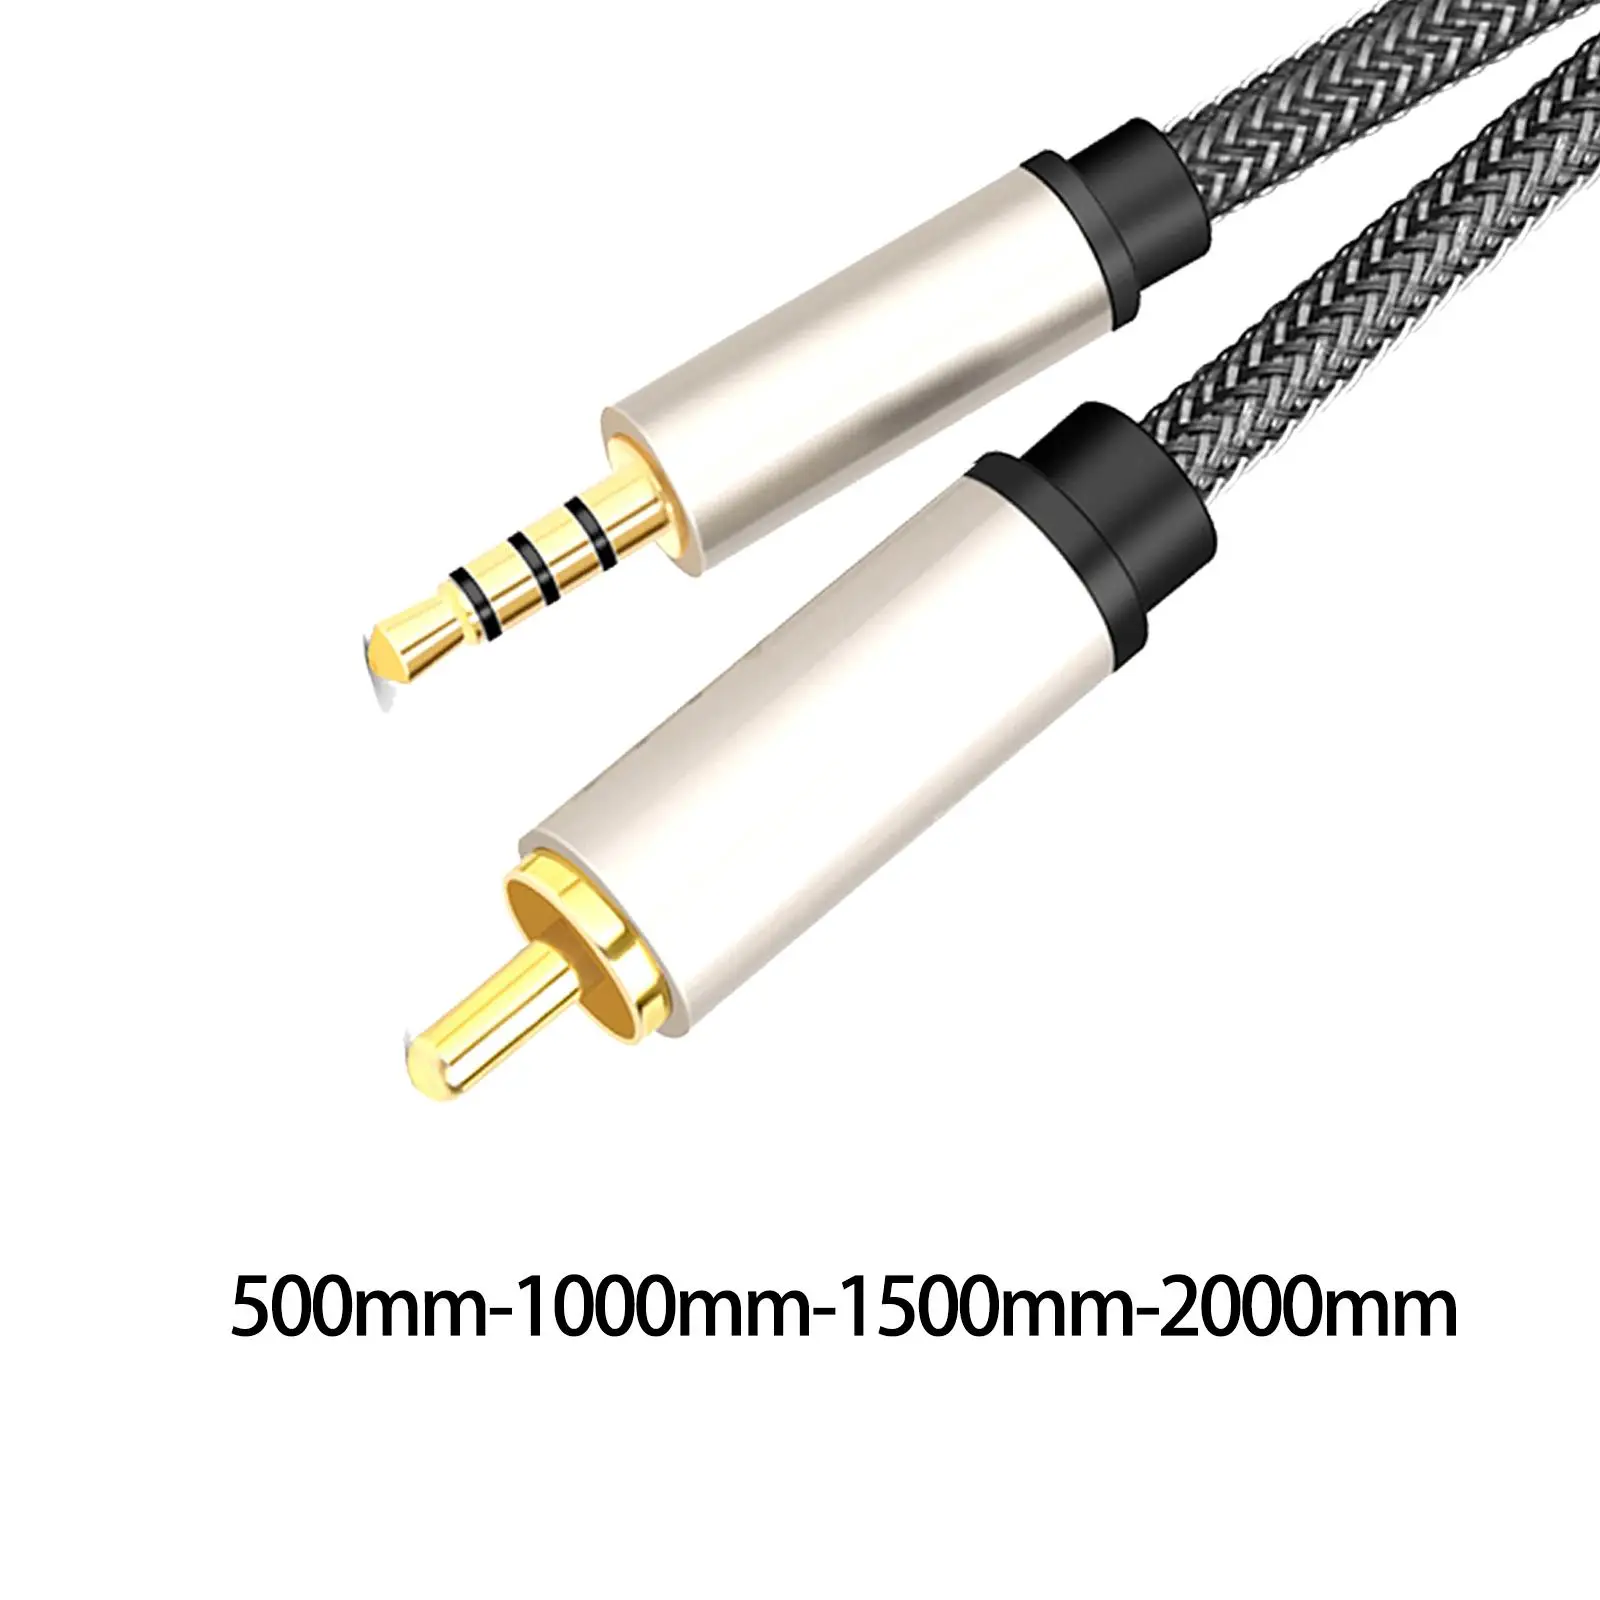 Coaxial Audio Video Cable RCA to 3.5mm Jack Male Auxiliary Input Adapter Wire Coaxial Cable for HDTV Speaker Amplifier Soundbar